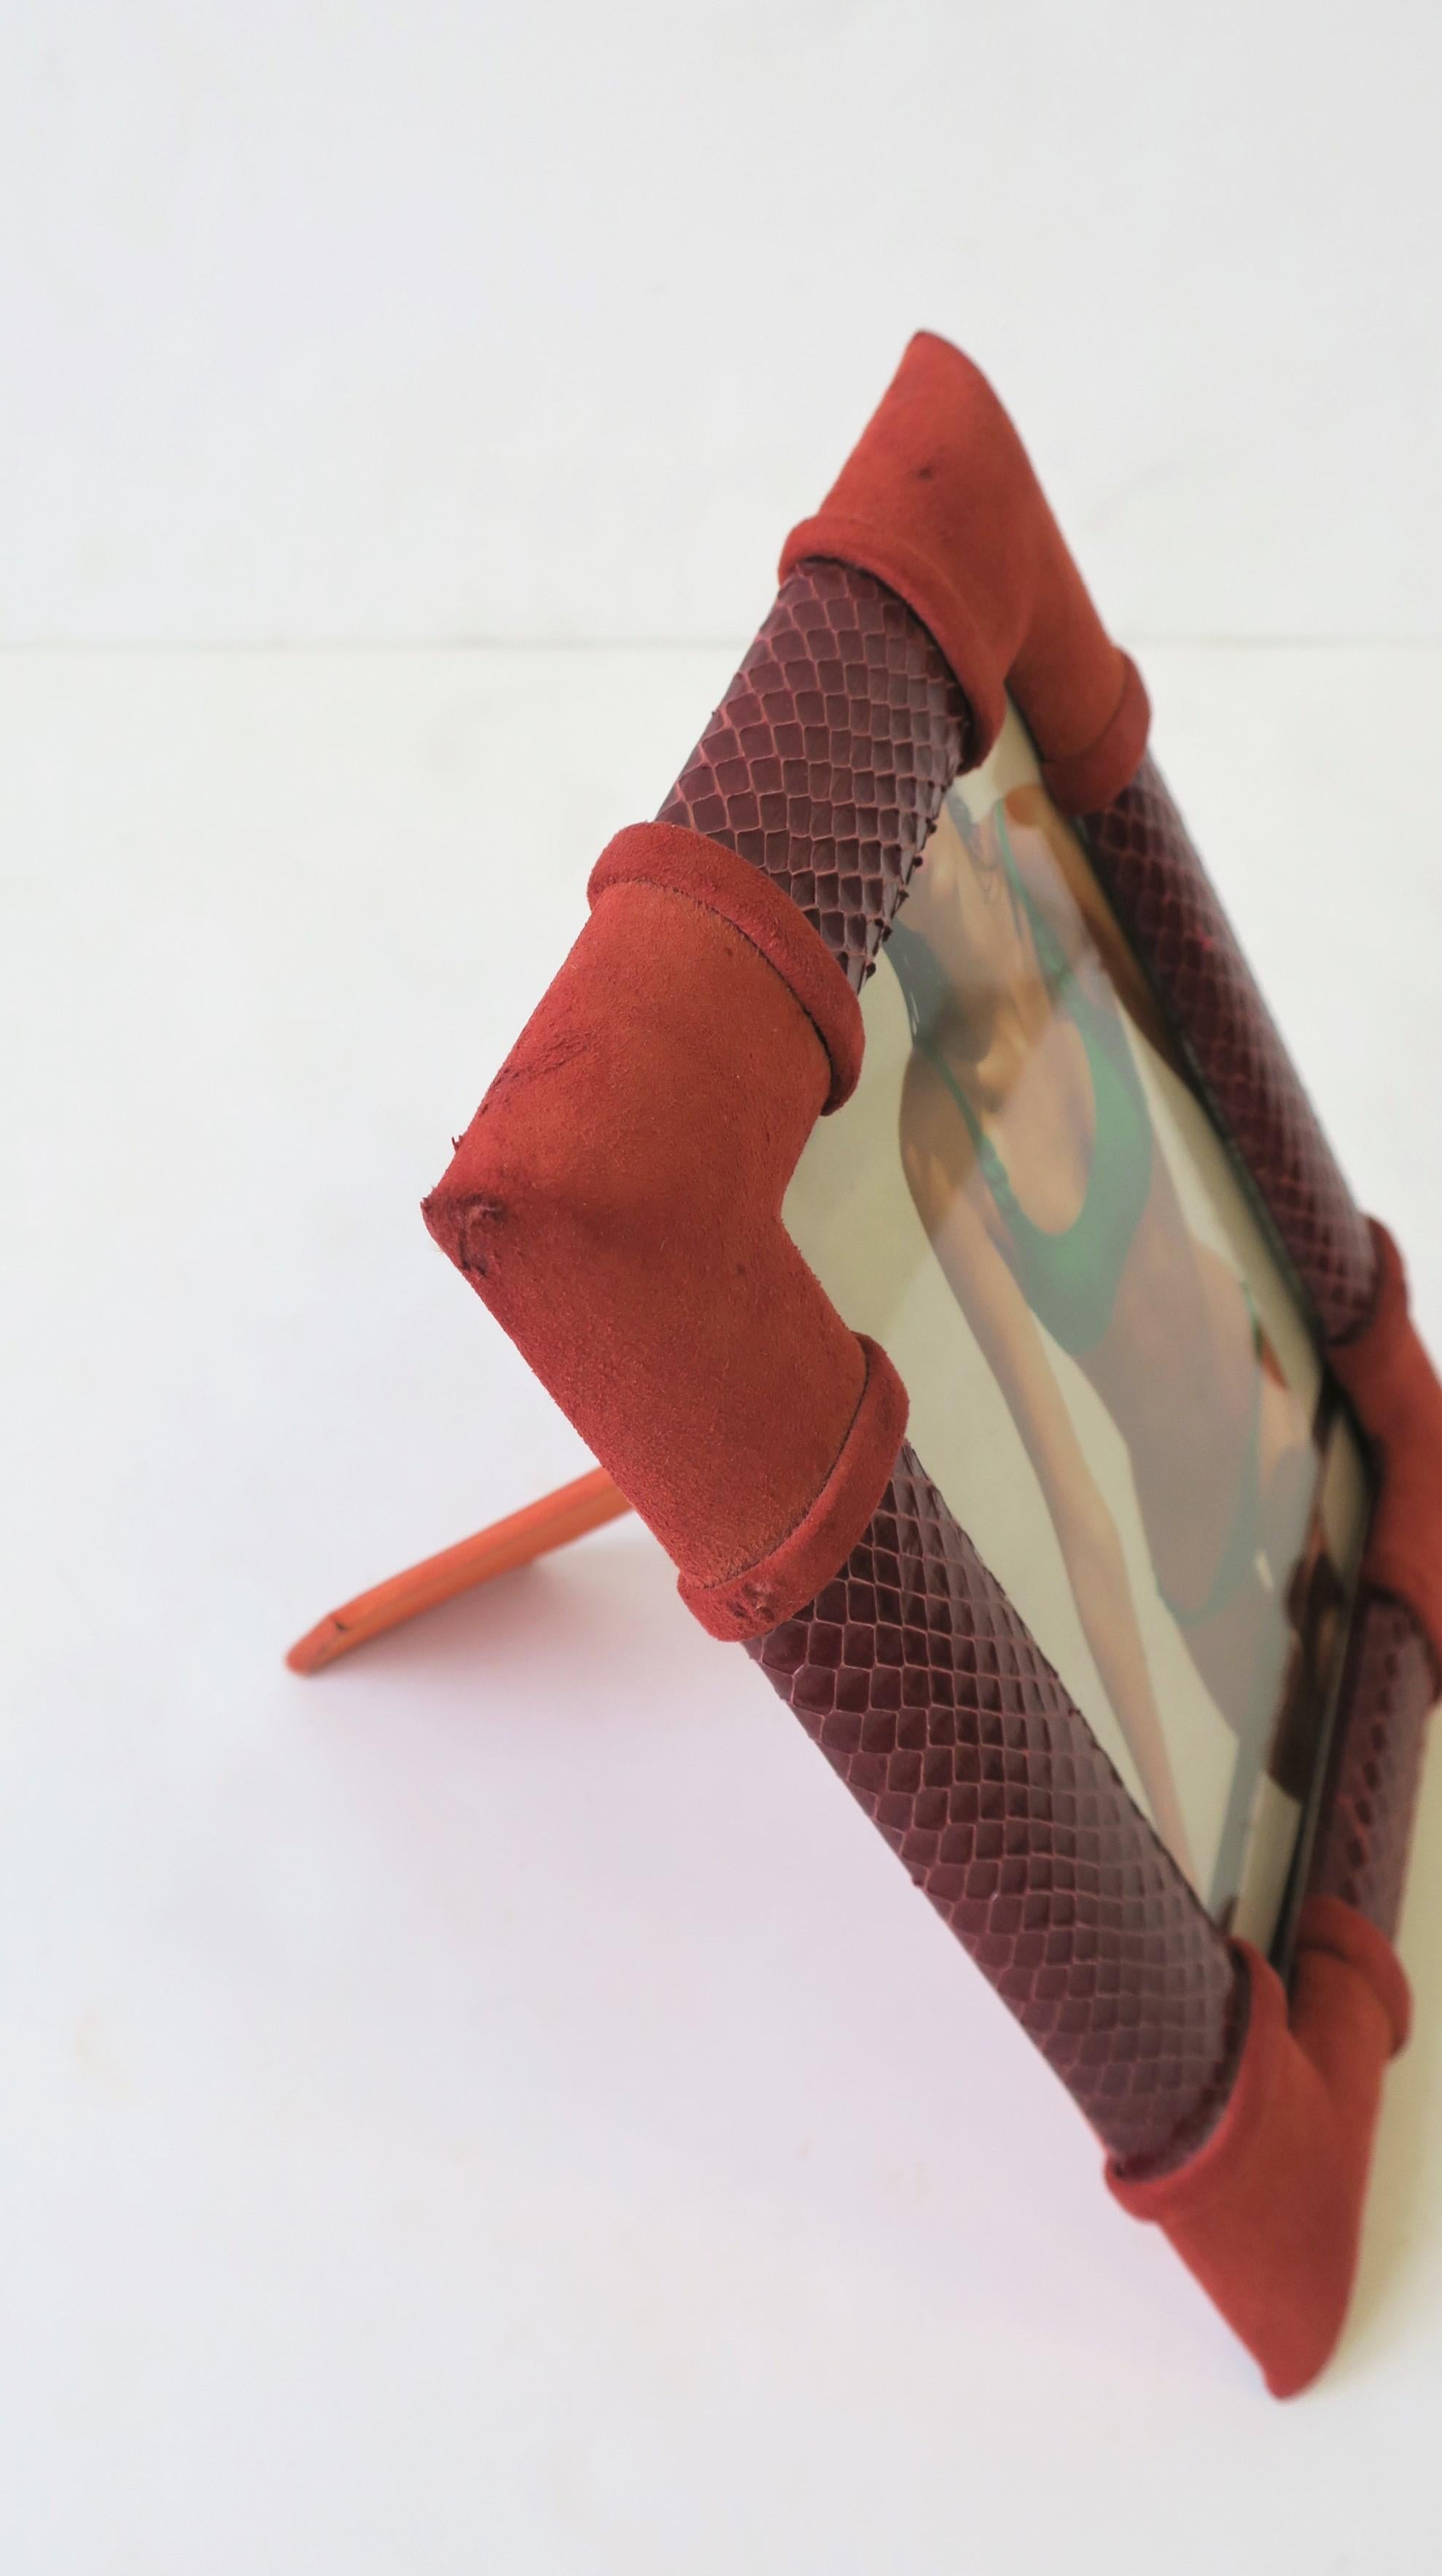 Italian Red Burgundy Suede and Snakeskin Picture Frame, circa 1970s For Sale 1